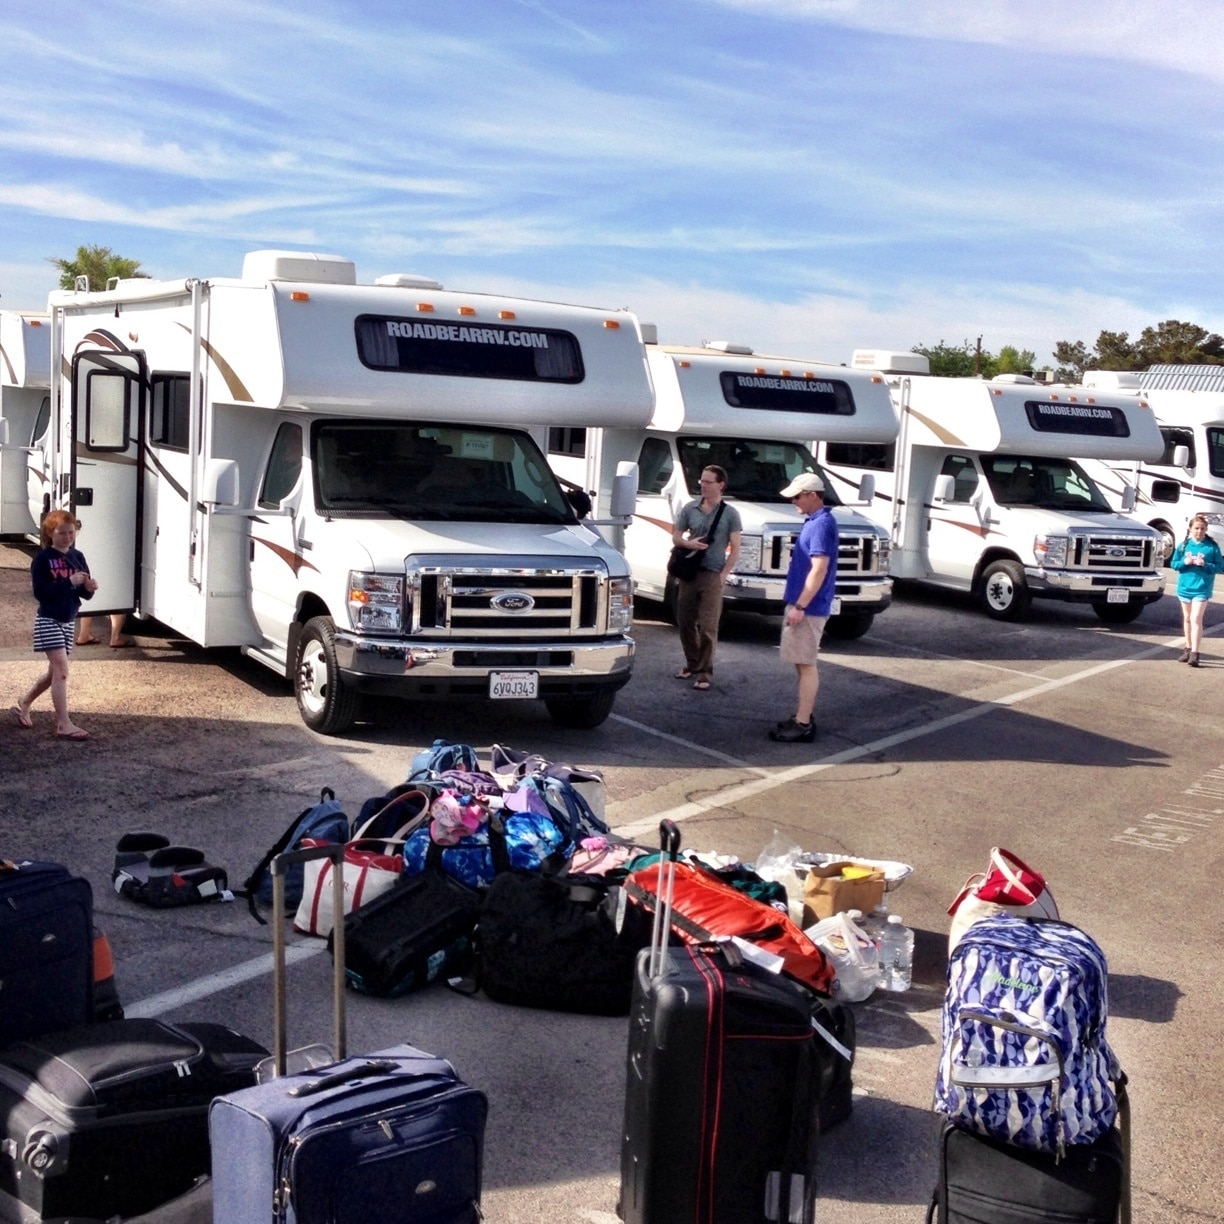 We used these guys to rent 5 RVs for a weeklong multi-family convoy around Arizona. Great outfit!  All RVs were clean, new, and complete with everything from cooking gear to camp chairs.  www.roadbearrv.com  #canyonballrun2013 
#roadtrip 